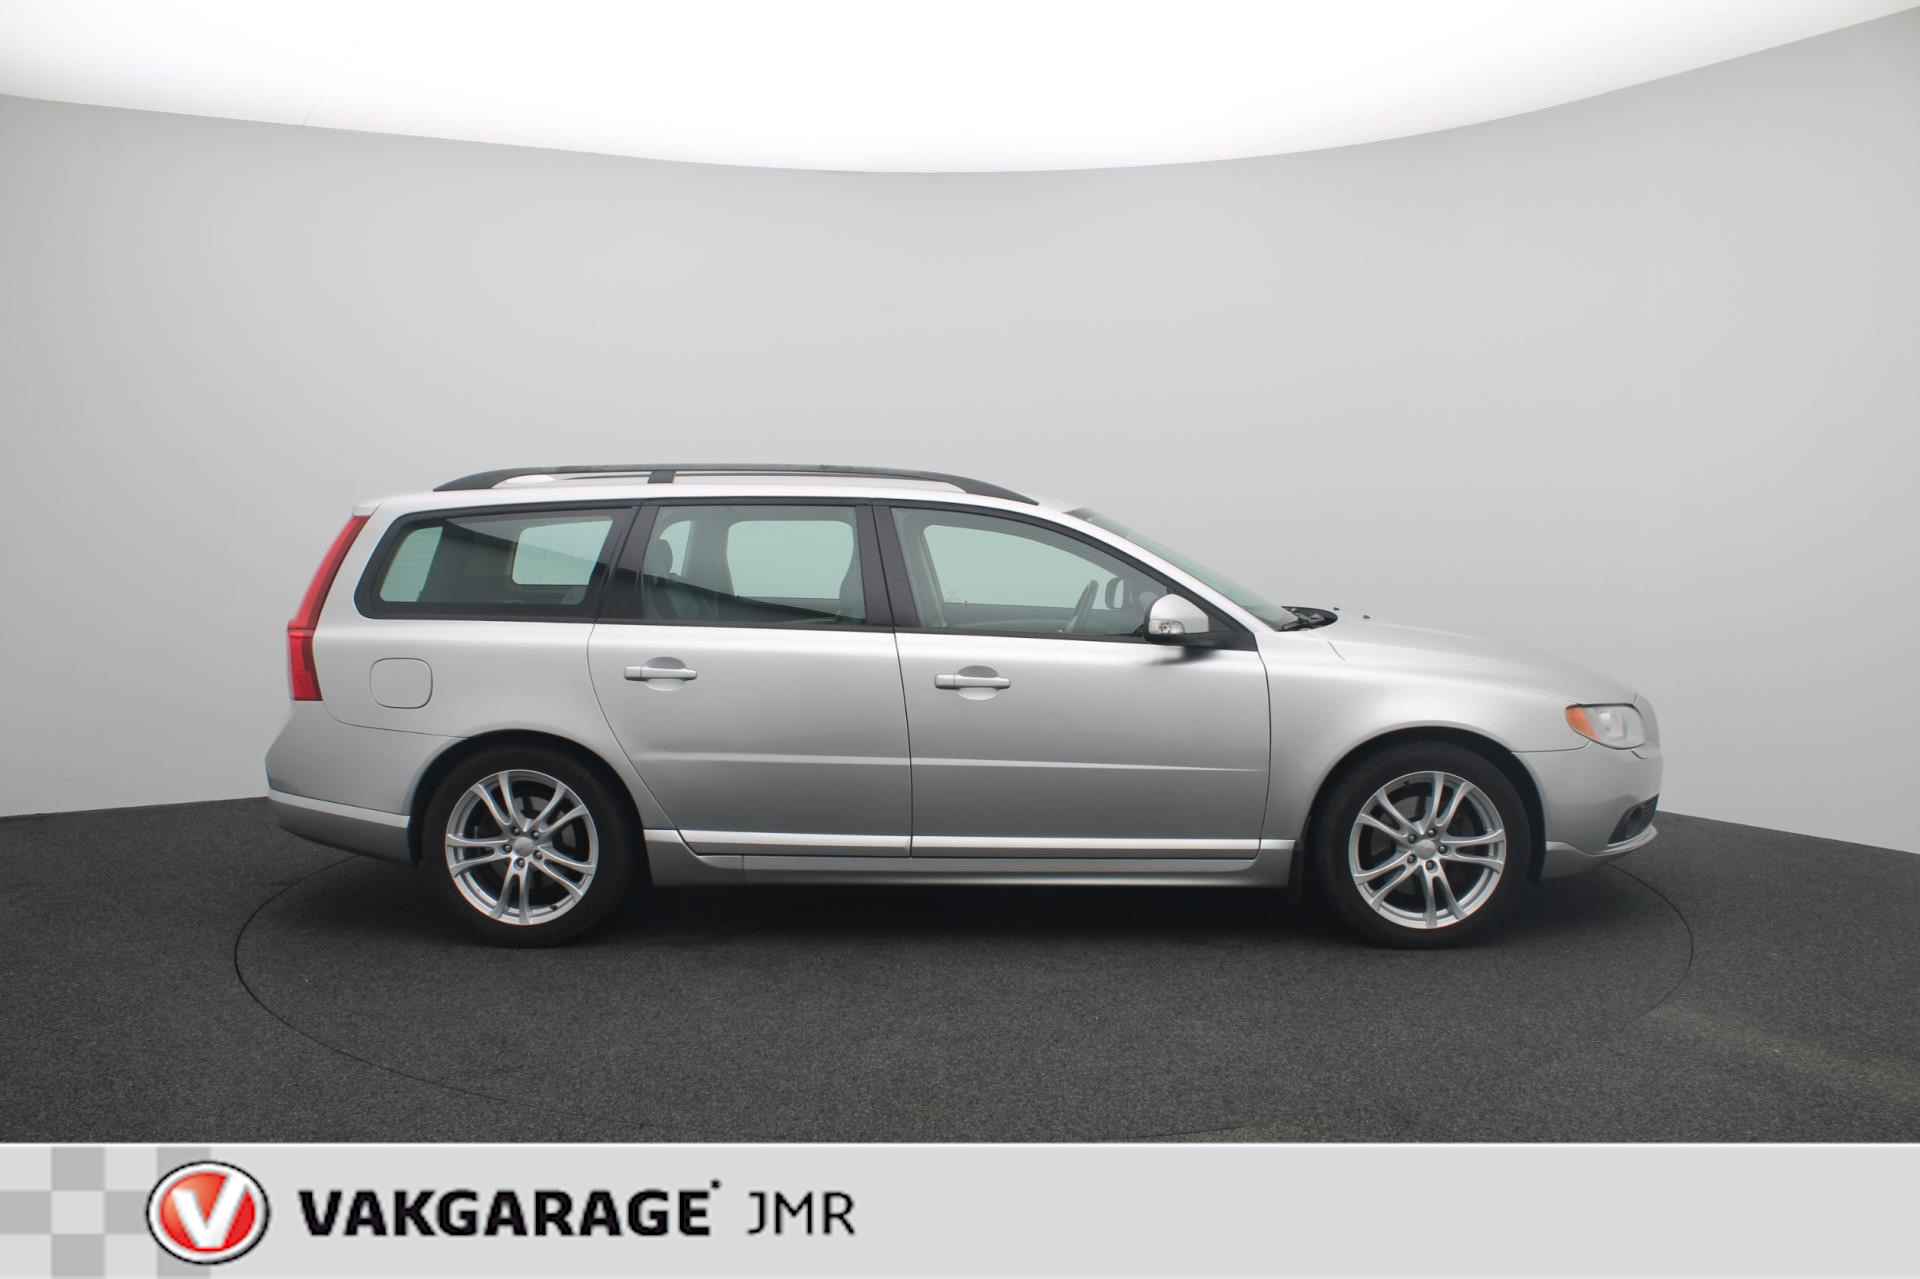 Volvo V70 2.5FT Momentum Youngtimer Trekhaak - PDC Achter - Stoel + Achterbank verwarming - Bluetooth - Climate en Cruise Control - 12/39